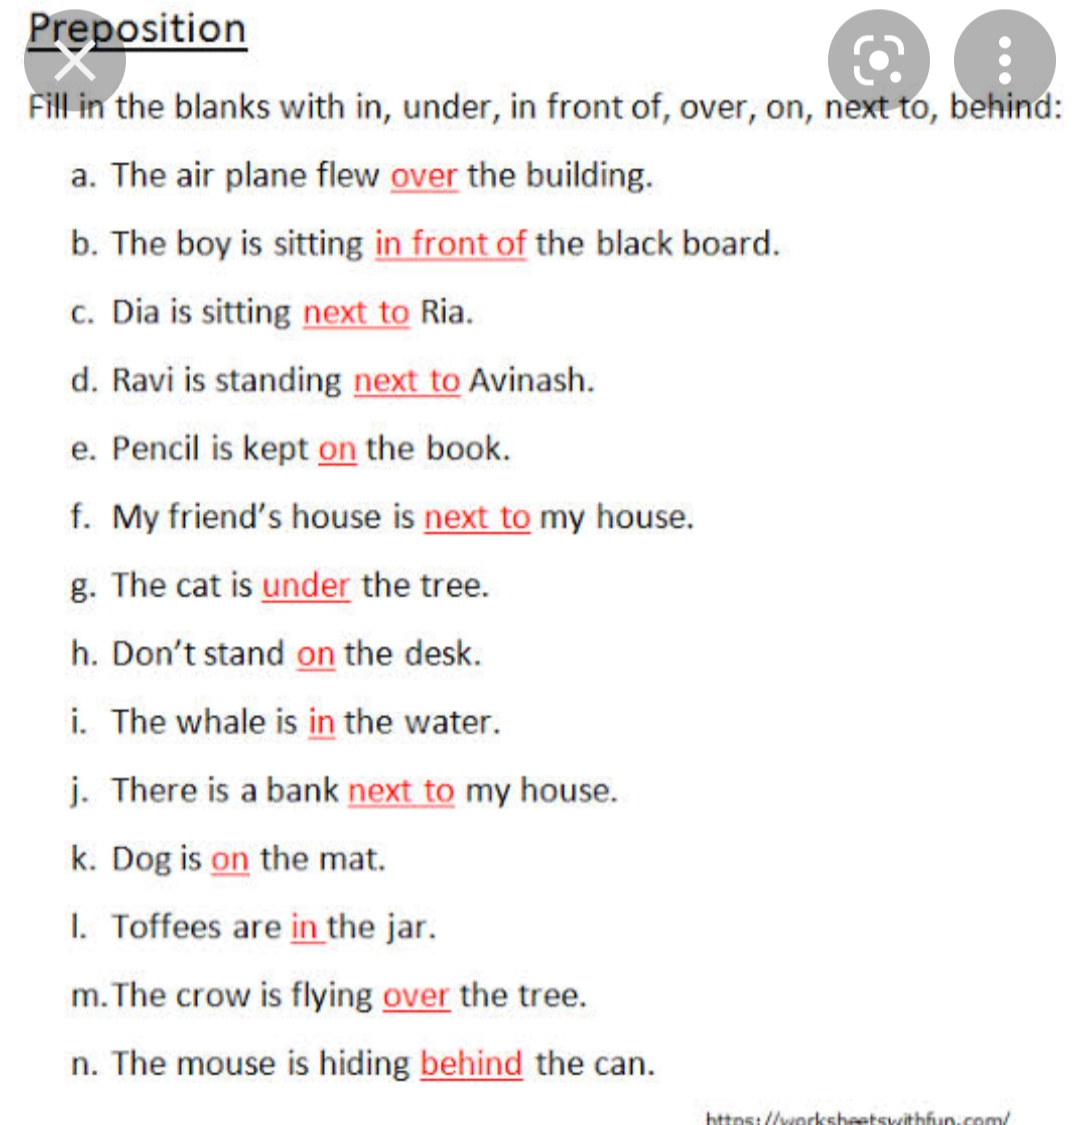 Prepositions Worksheets With Answers